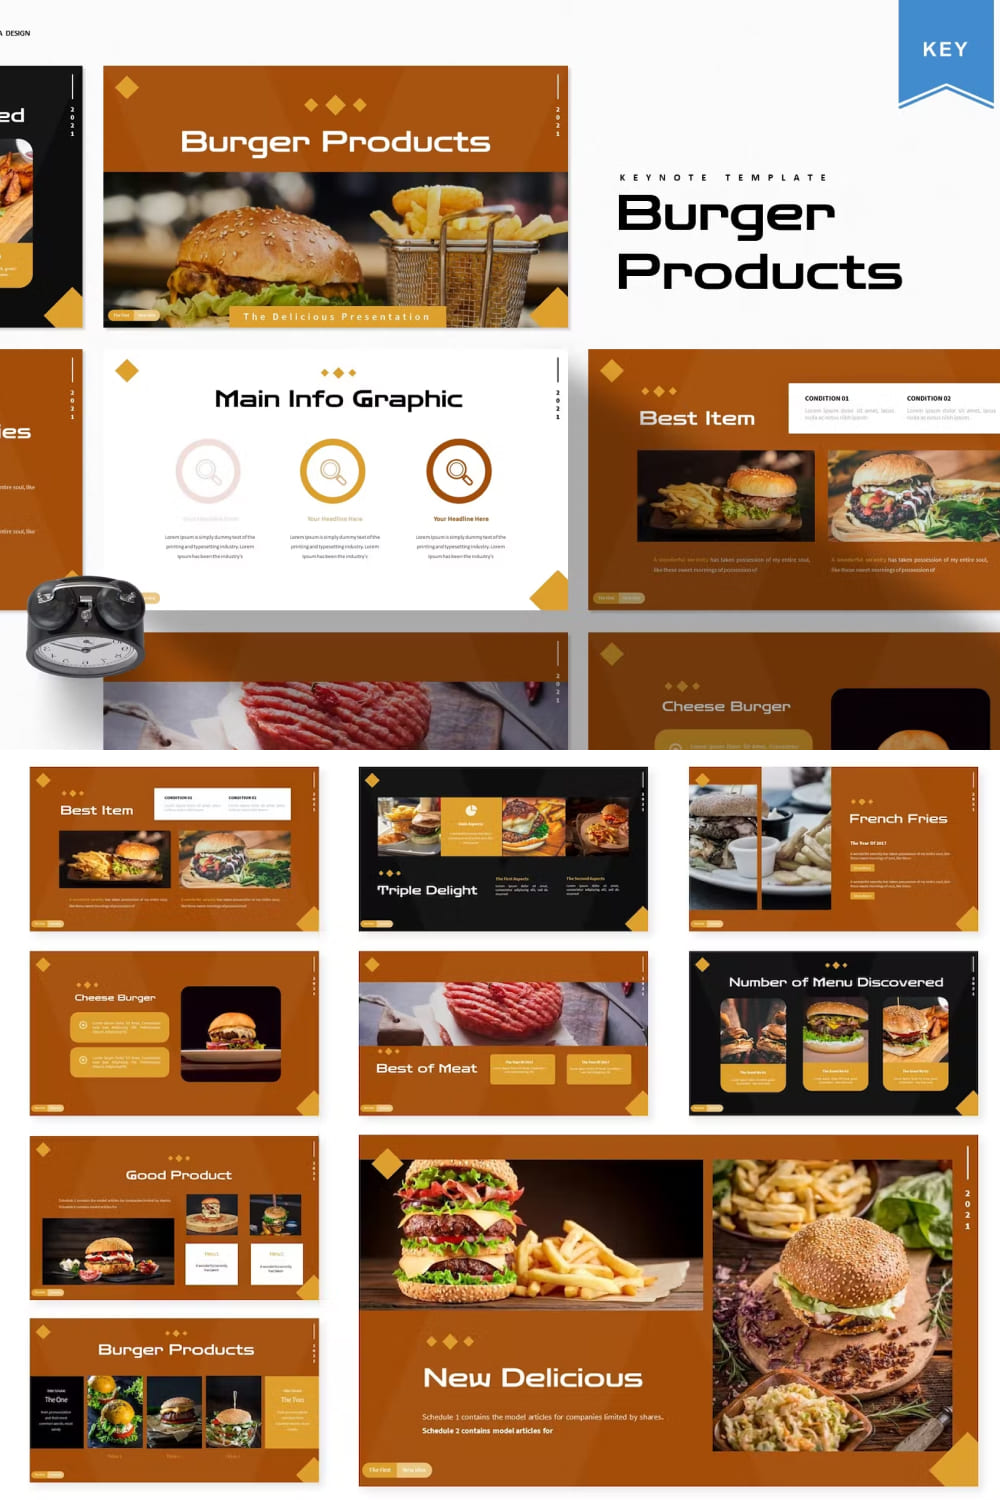 Burger Products | Keynote Template - Pinterest.